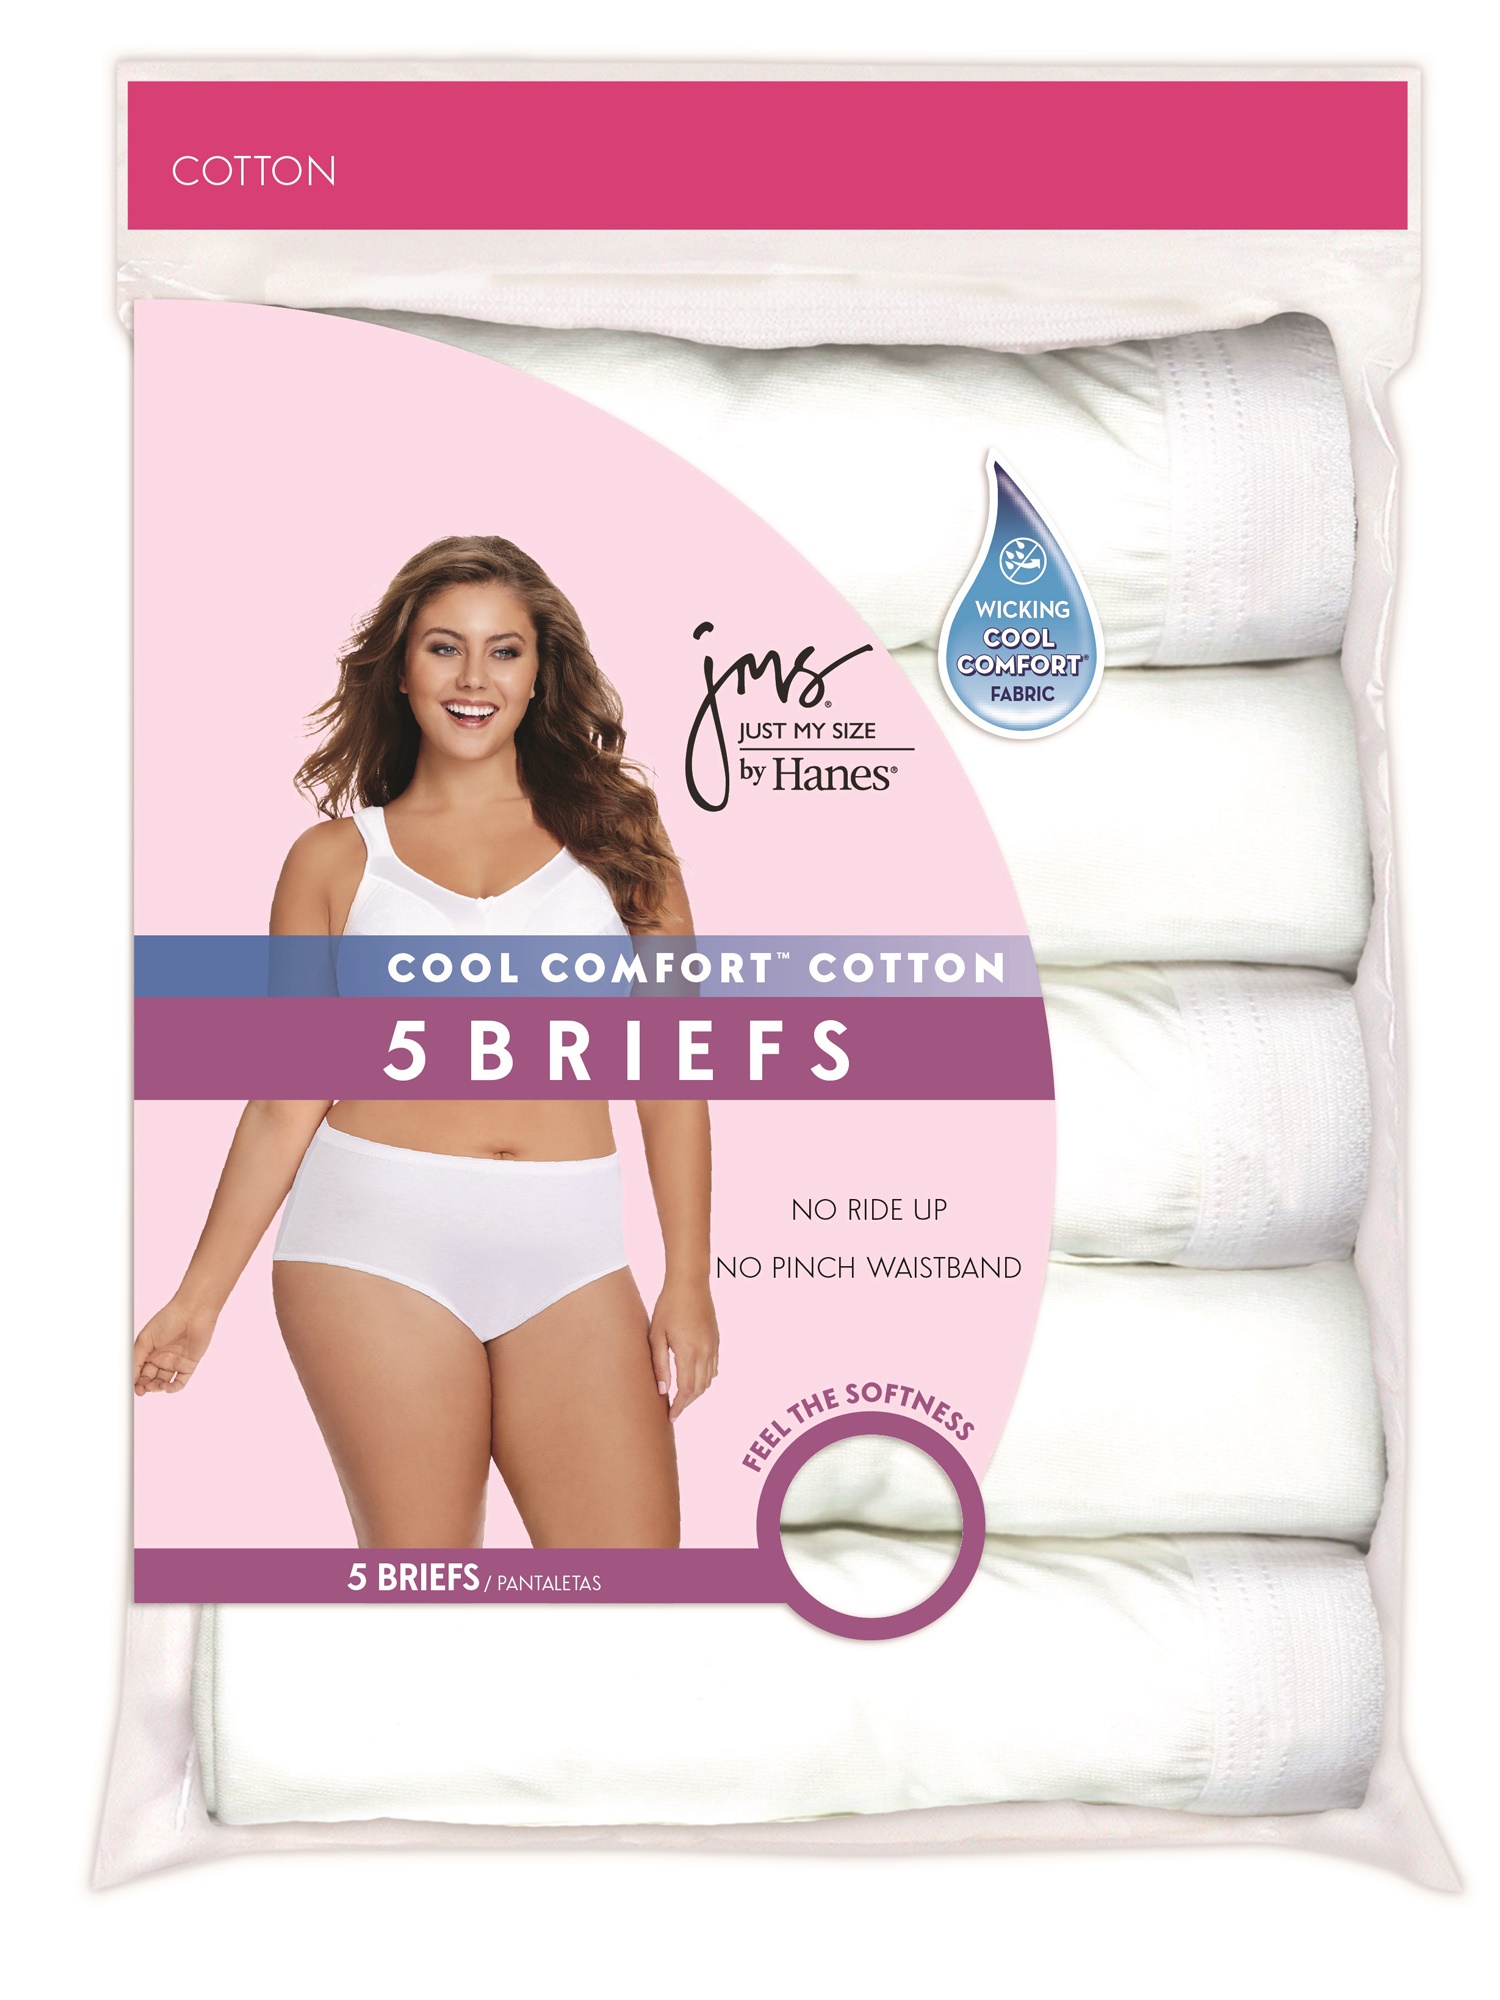 Just My Size Women's Plus Tagless White Cotton Briefs 5-Pack - image 3 of 4